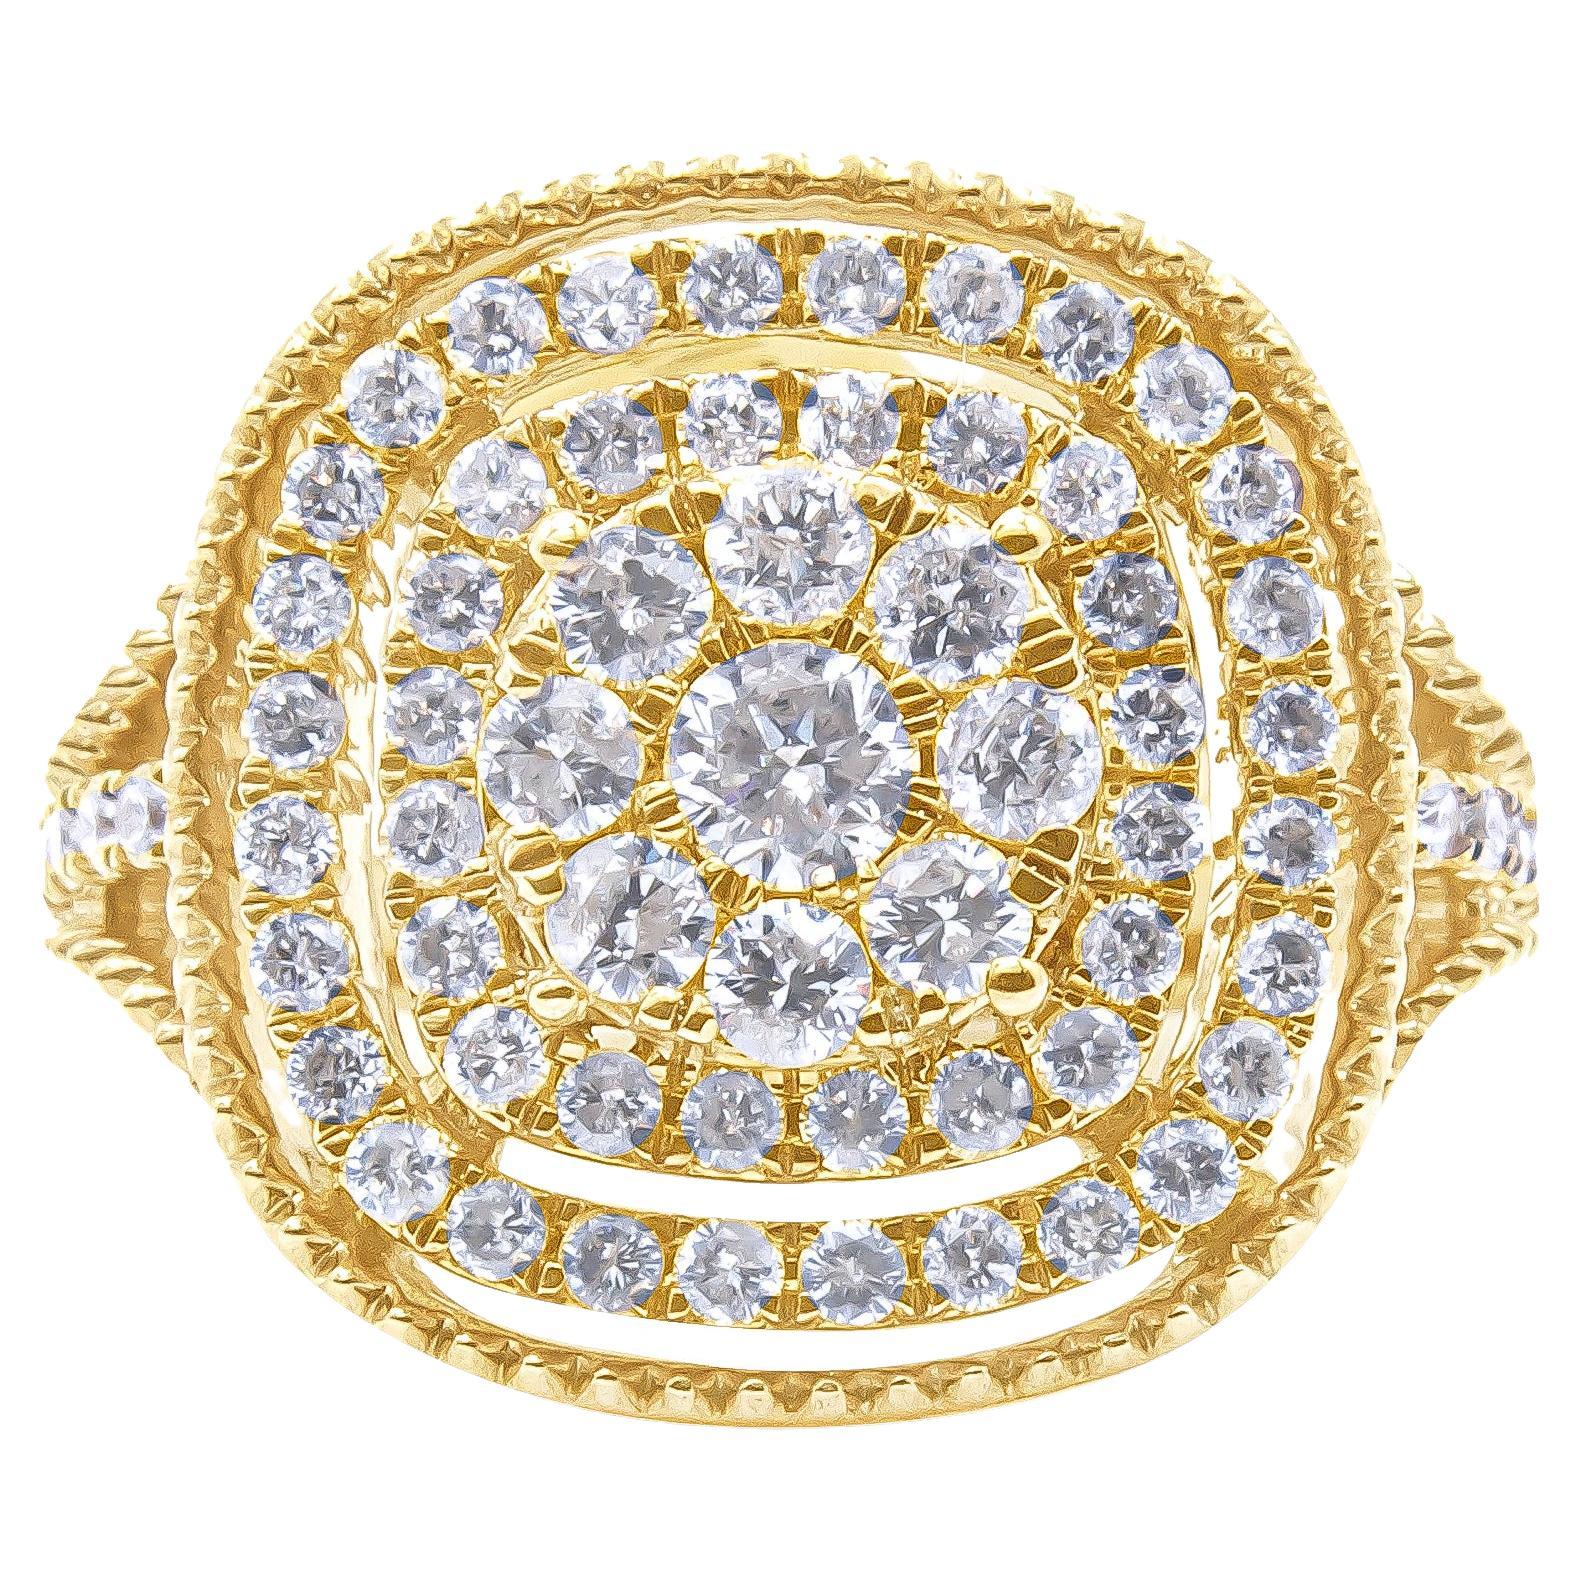 10K Yellow Gold Plated .925 Sterling Silver 1 1/4 Carat Diamond Cocktail Ring